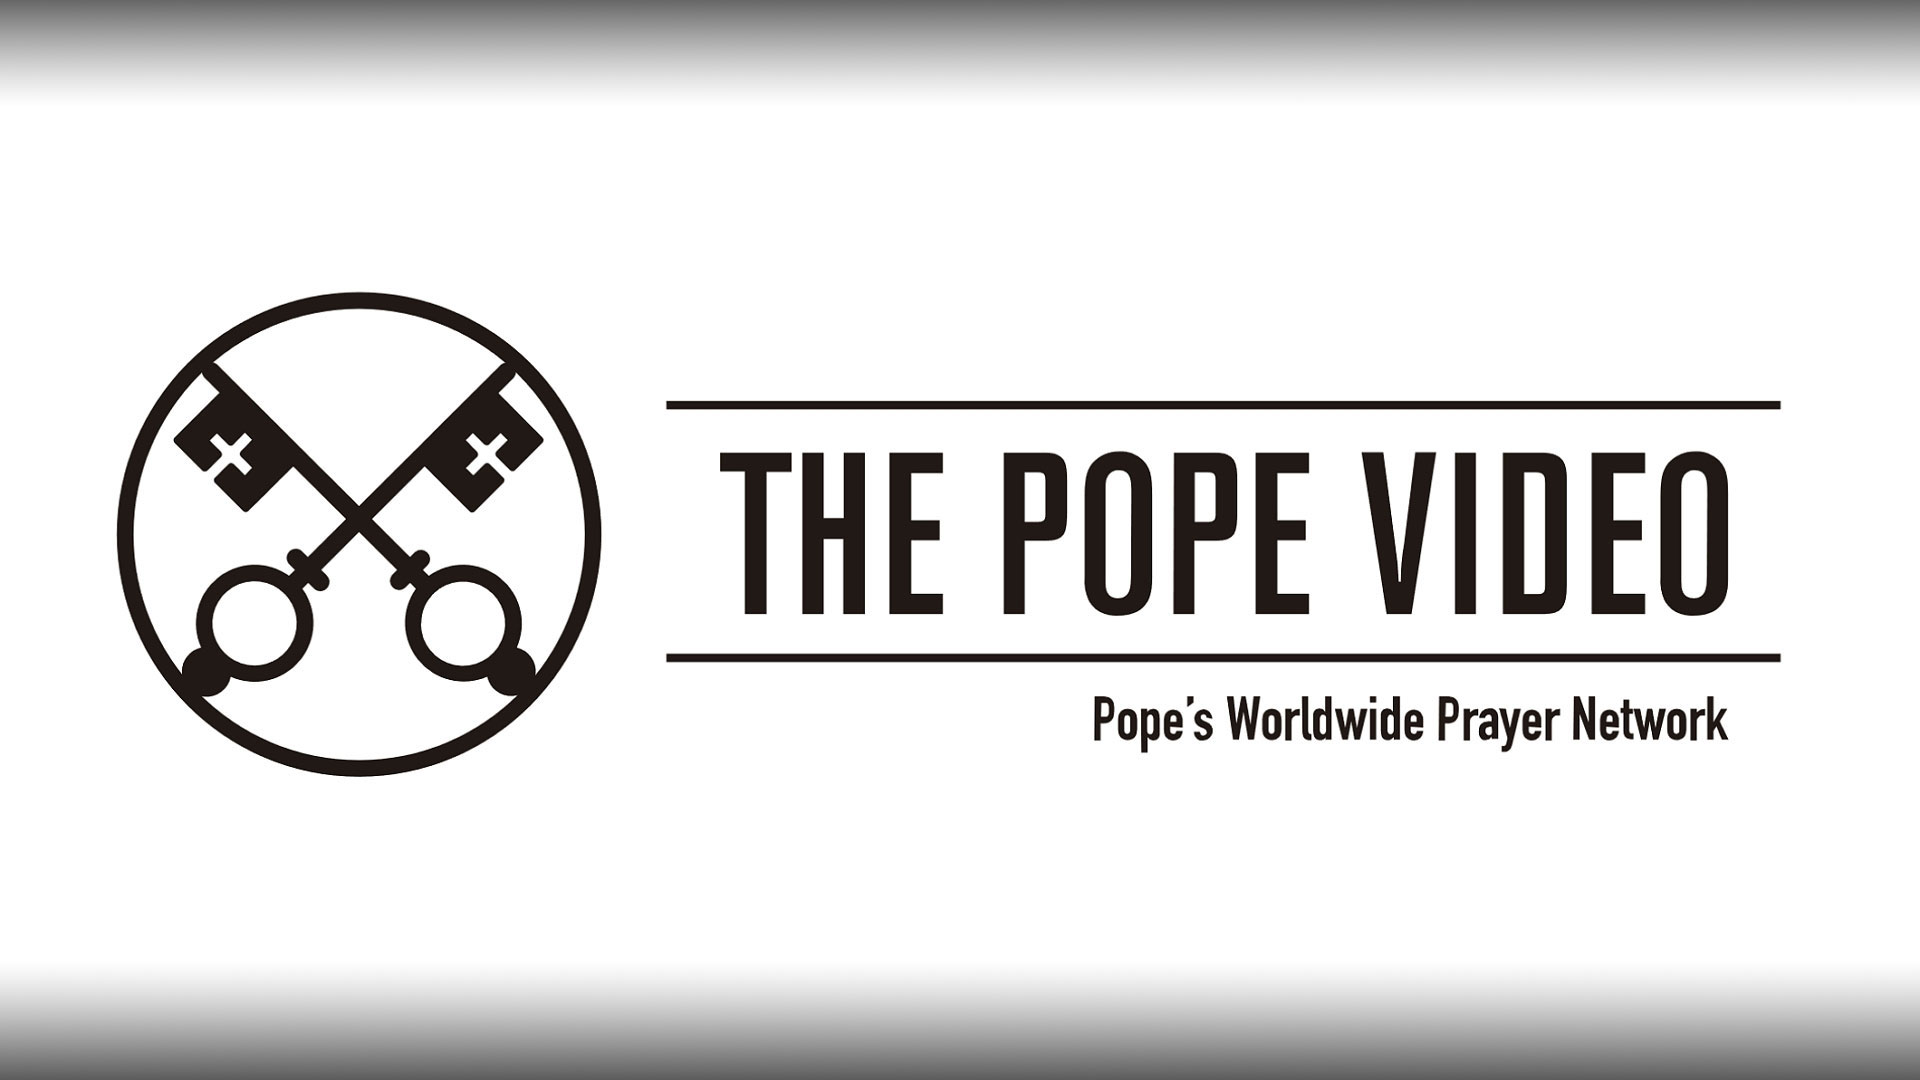 Social friendship – The Pope Video